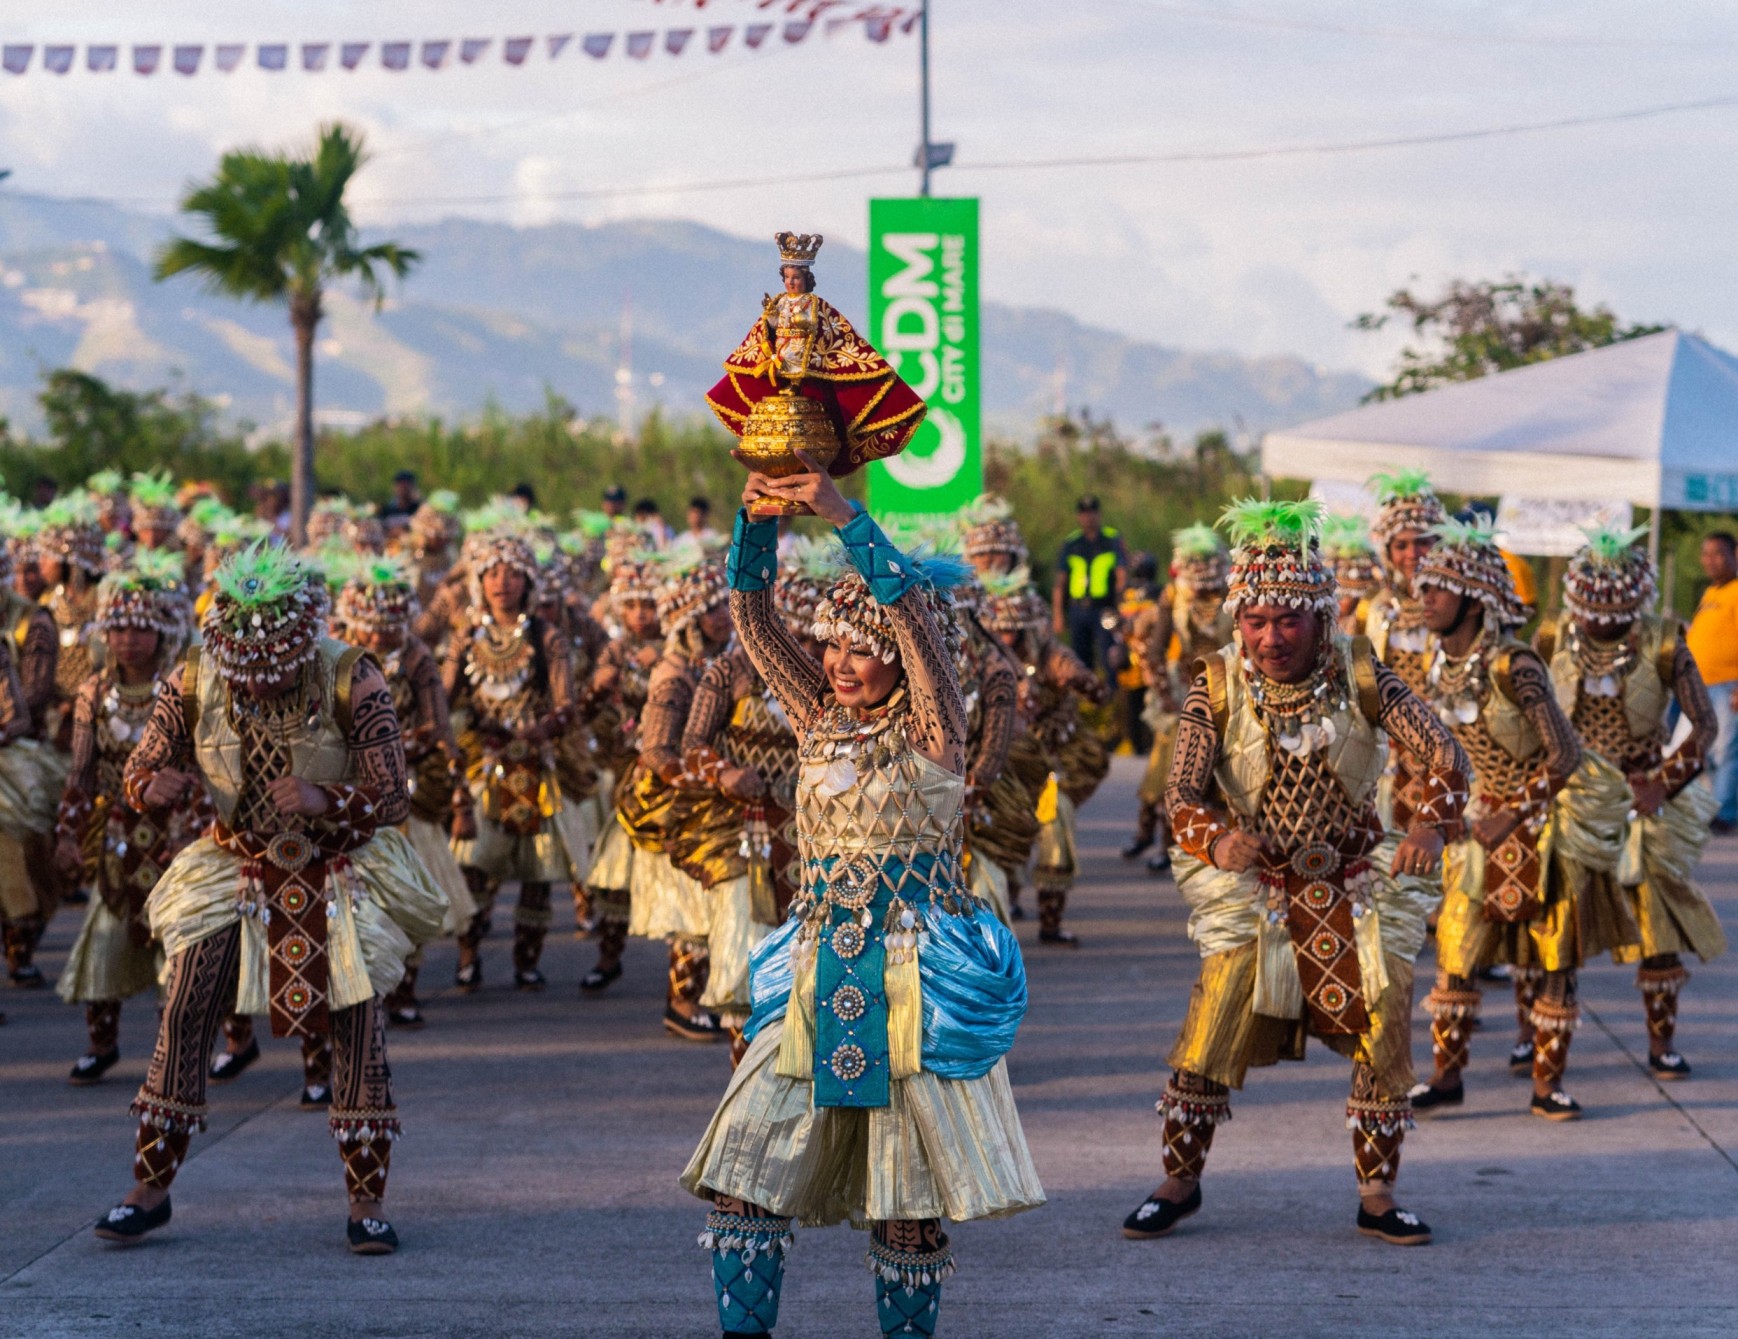 City di Mare hosts Cebu’s Sinulog Festival for the 2nd year